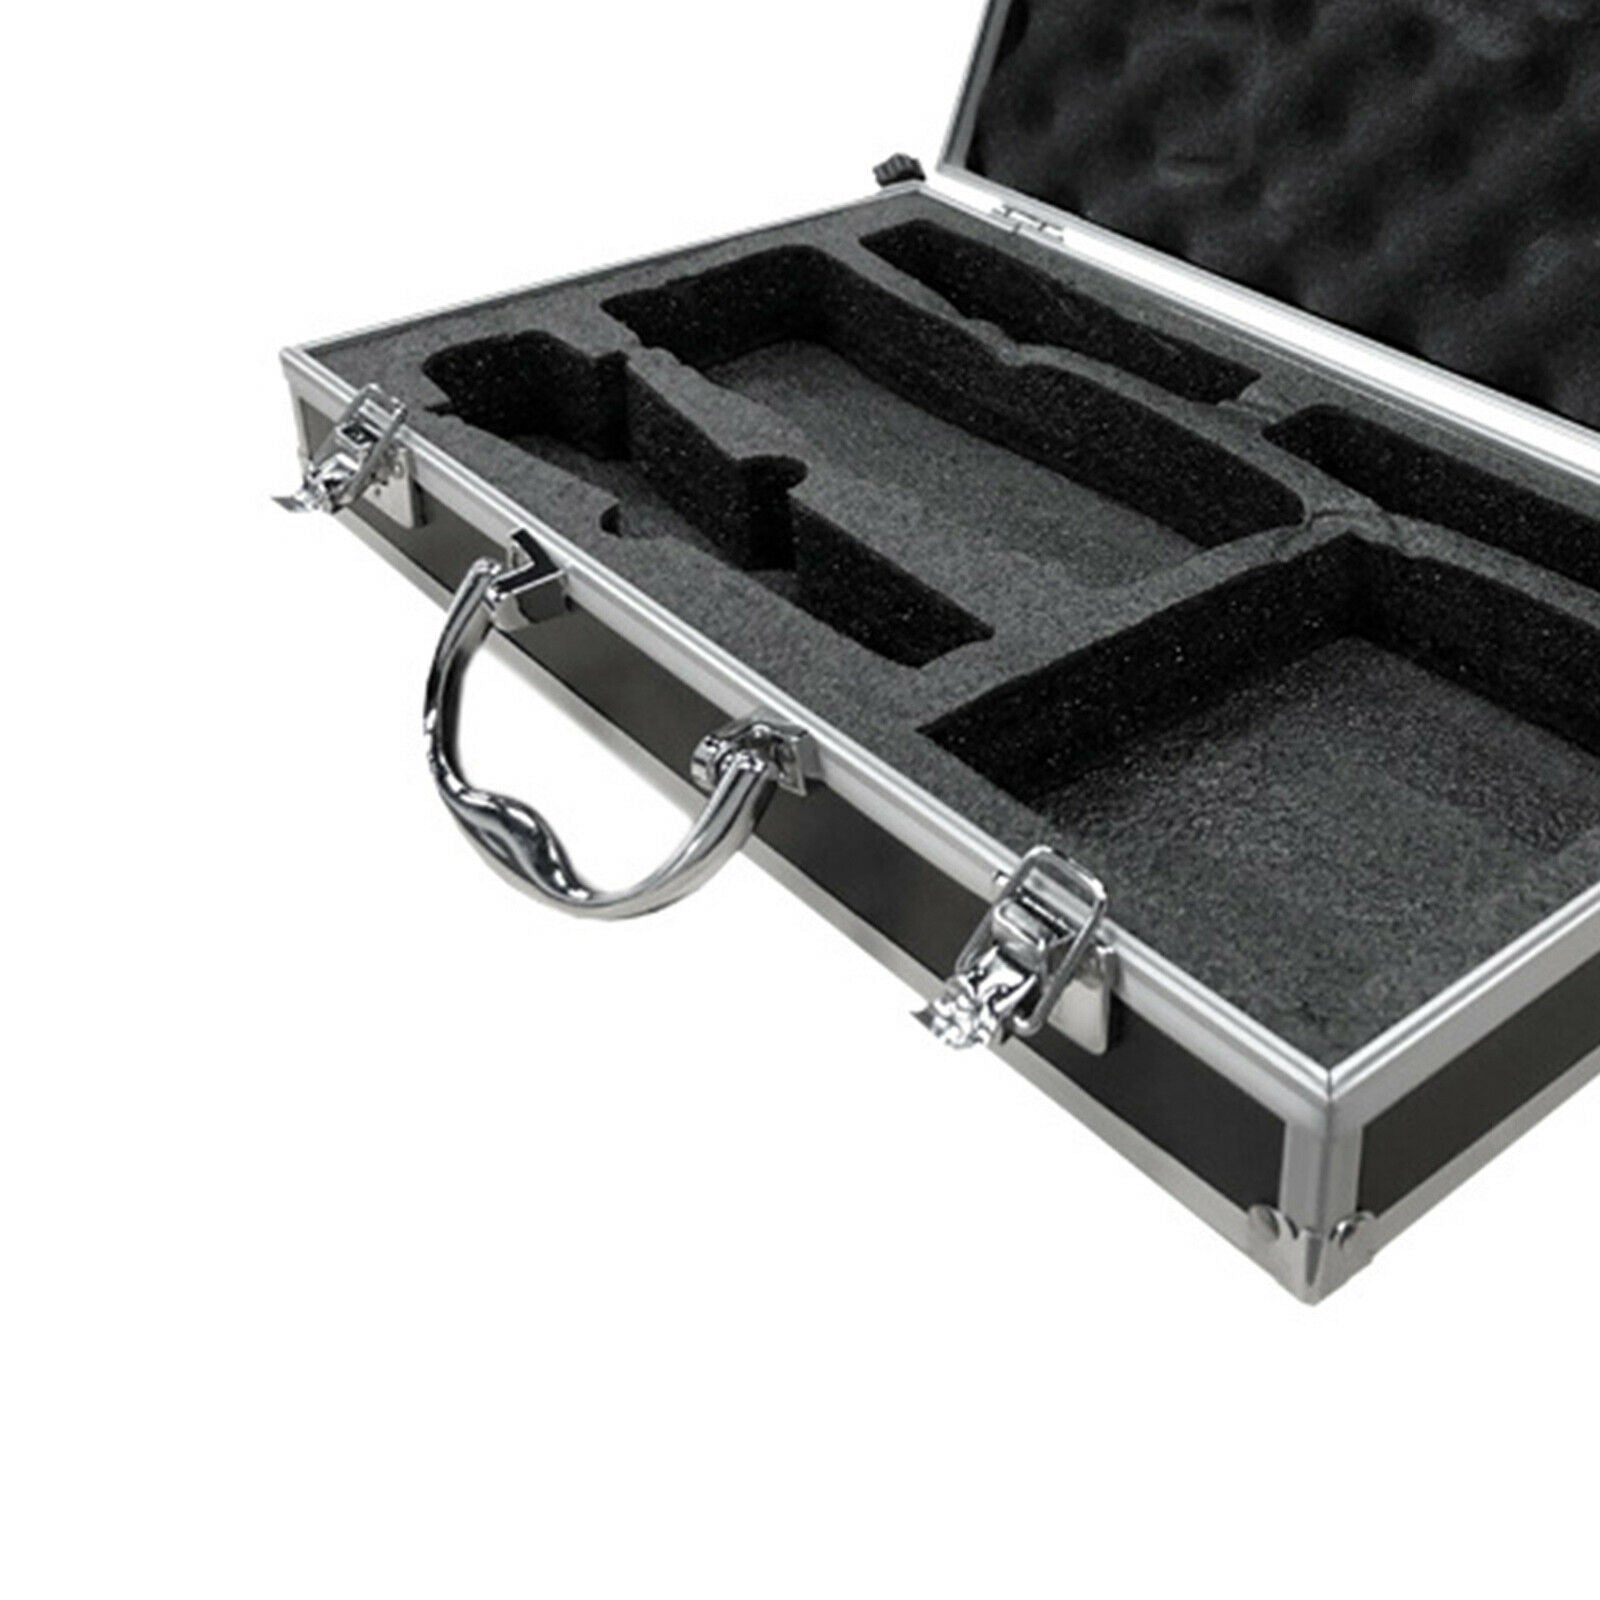 Microphone Carrying Case Storage Vocal Microphone Hard Case with Sponge